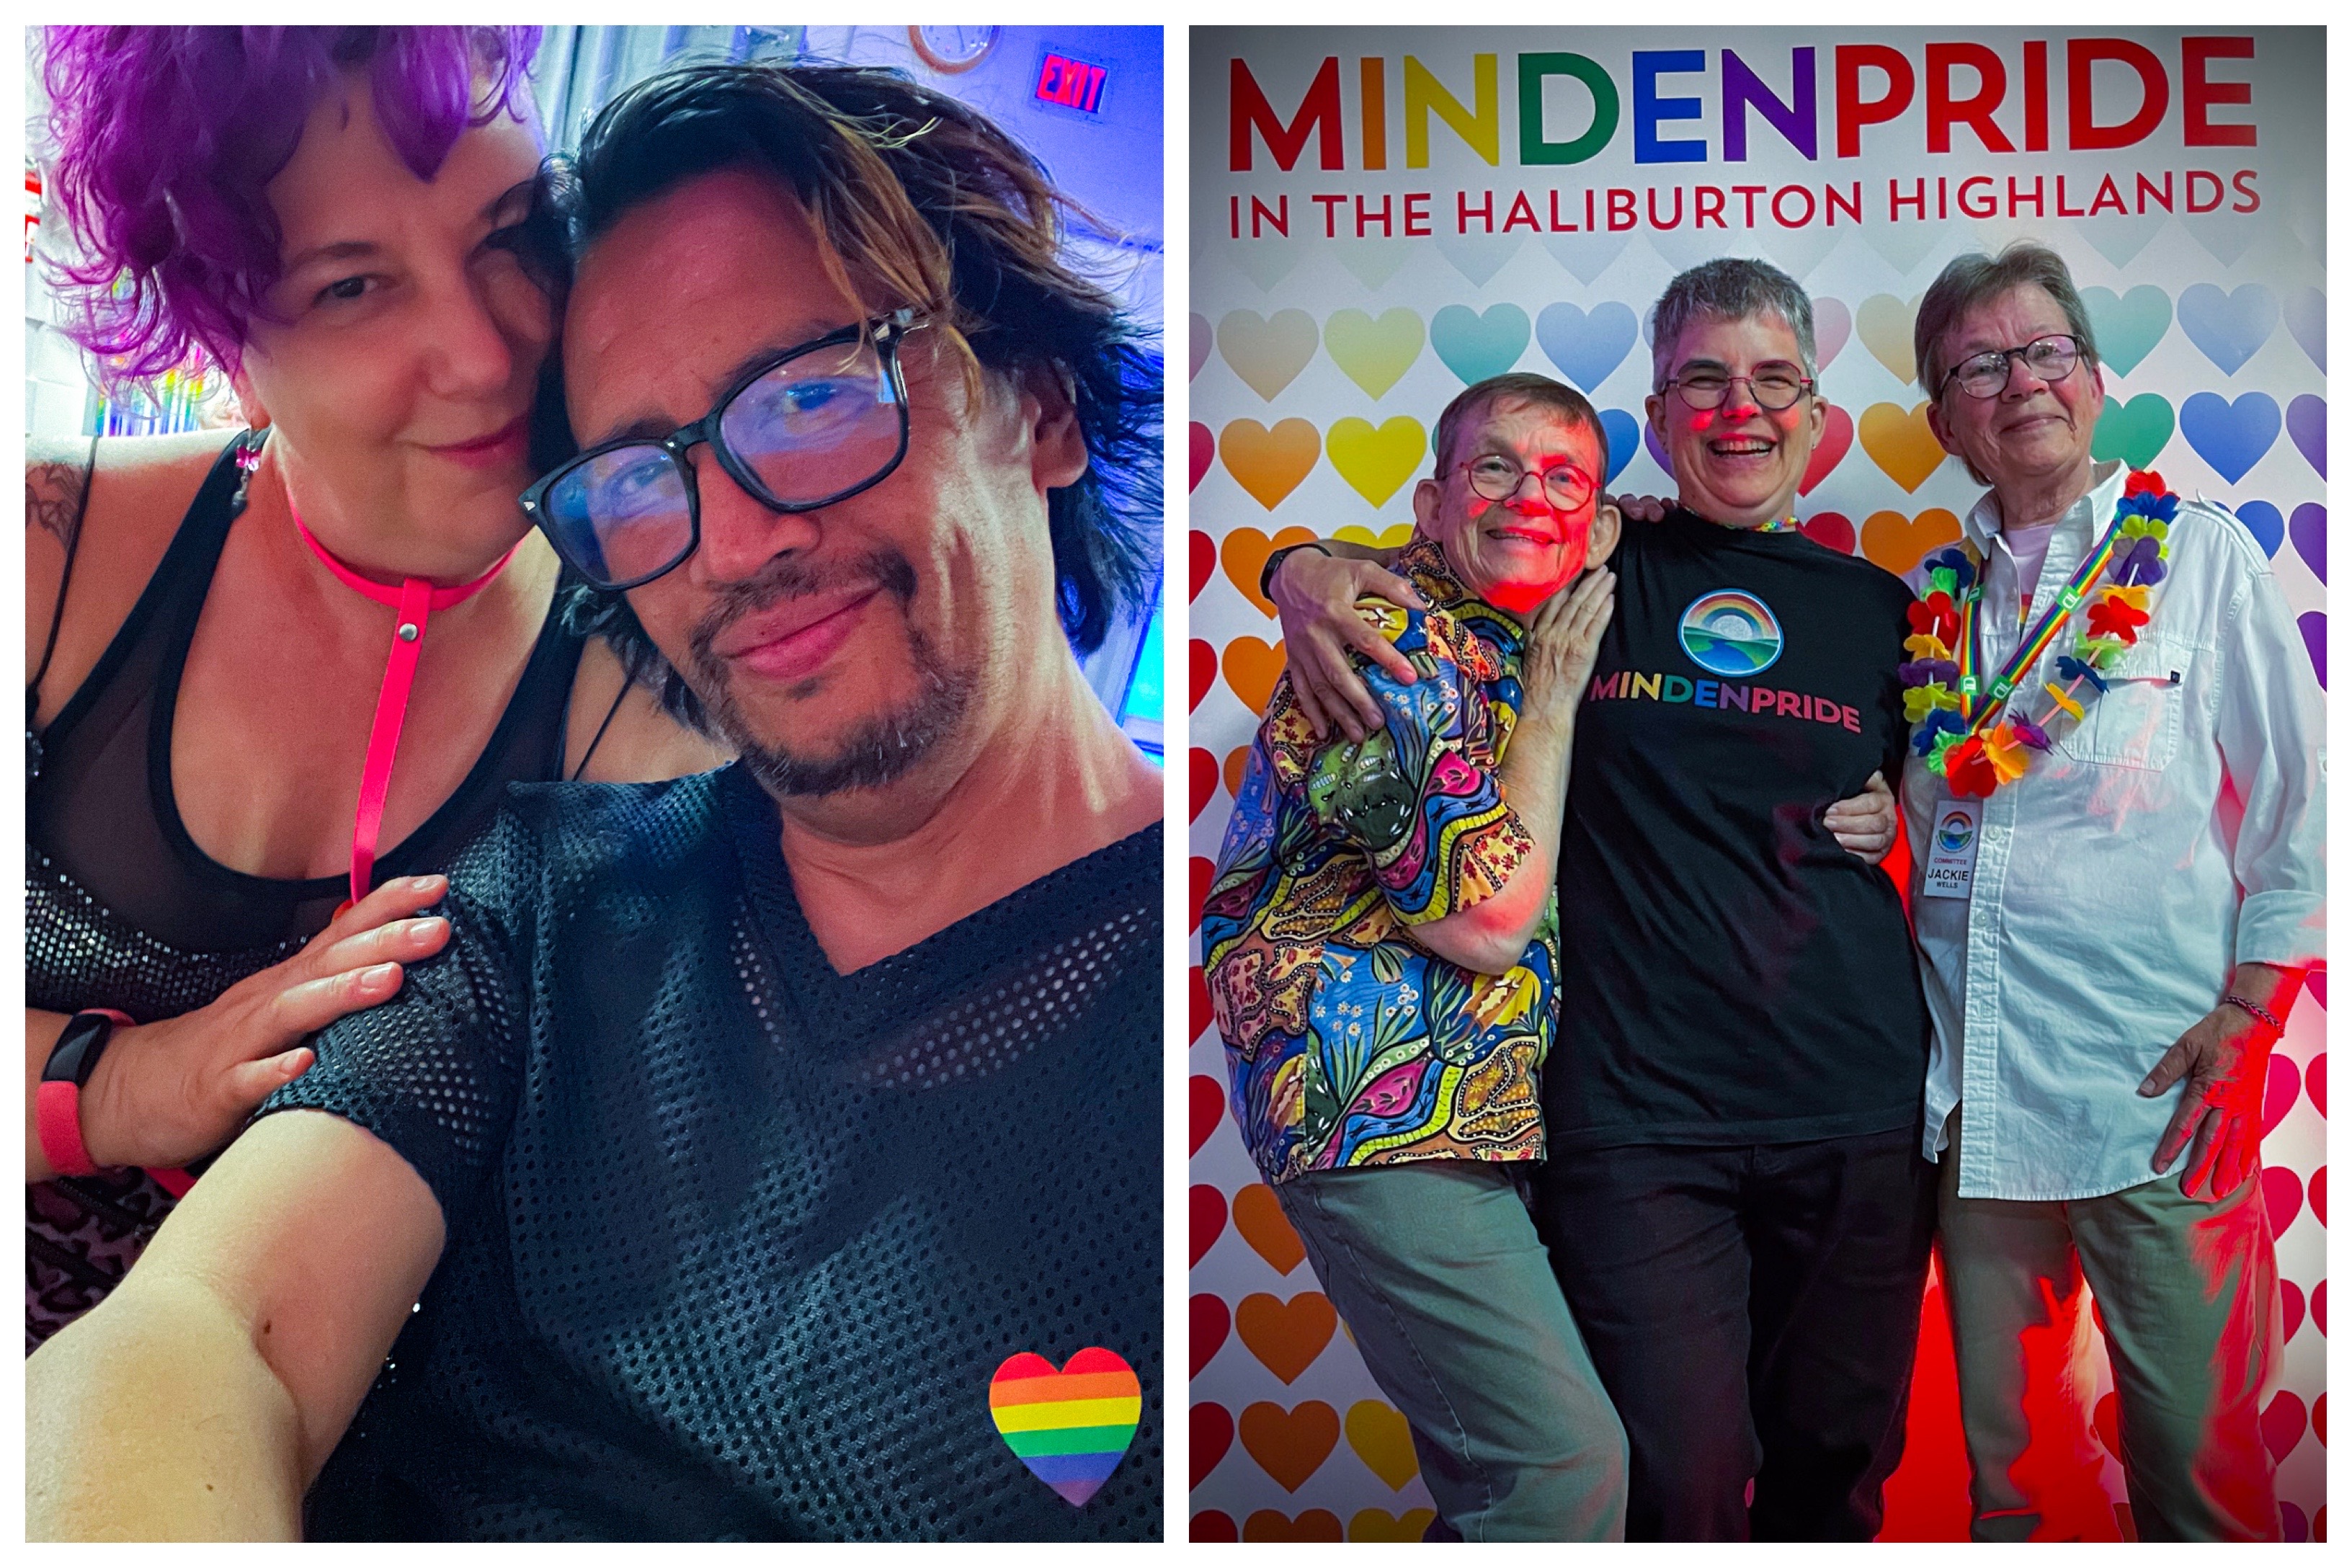 two photos of smiling people with arms around each other's shoulders, wearing rainbow hearts, flowered necklaces and bright colours. In one photo there is a rainbow "Minden Pride" banner.